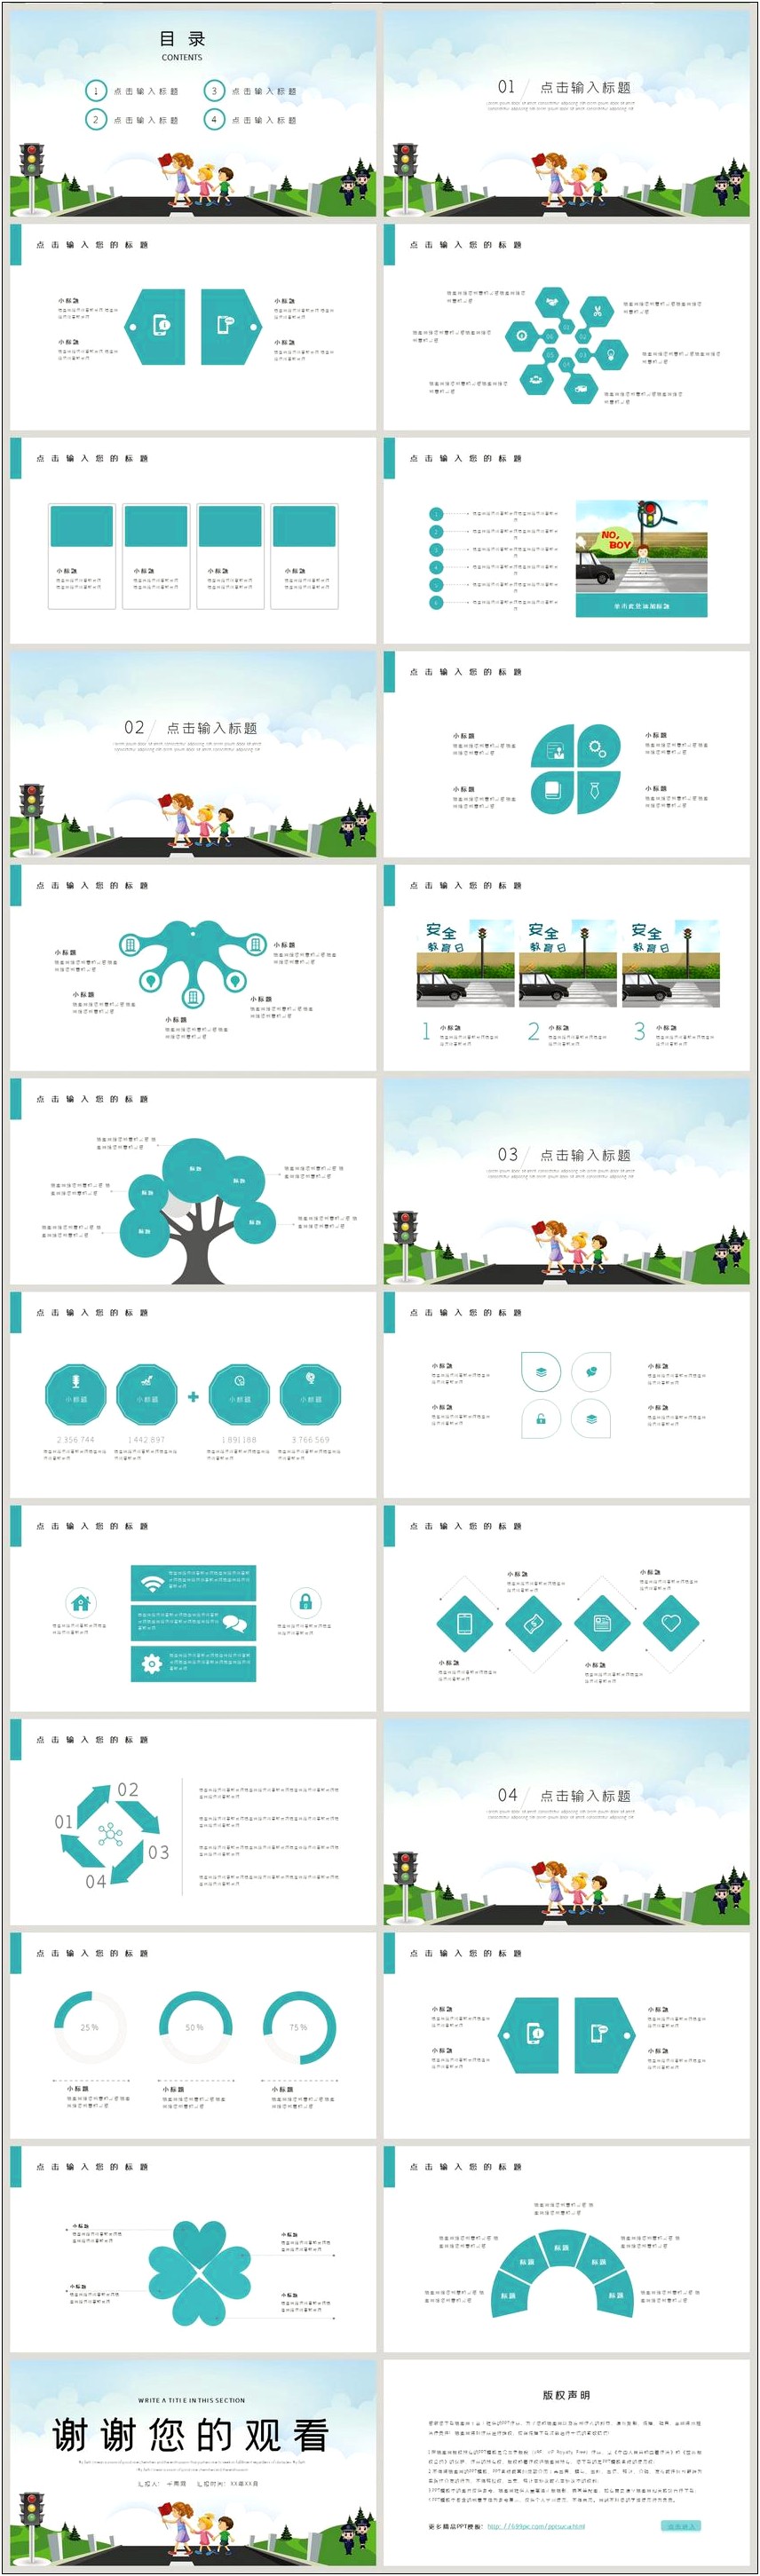 Road Safety Ppt Template Free Download